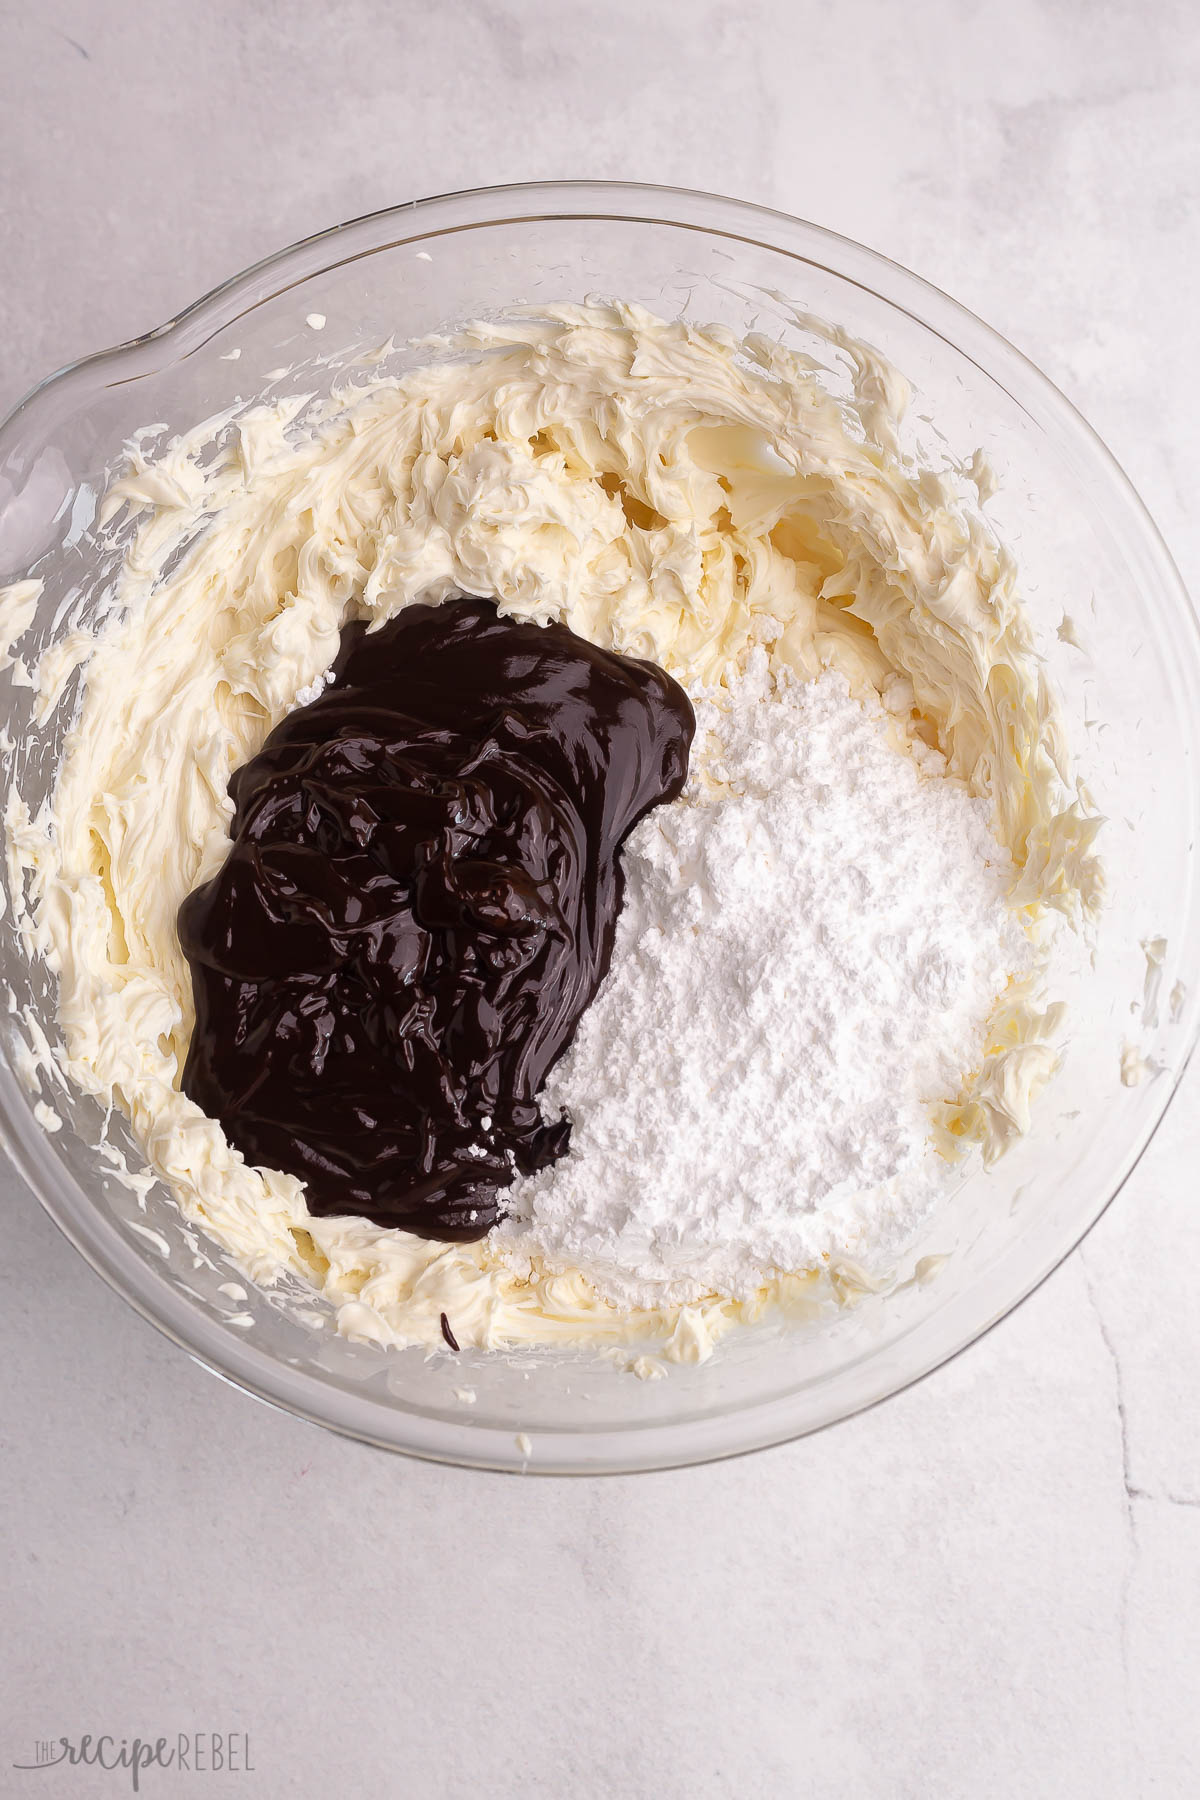 melted chocolate and powdered sugar added to cream cheese.